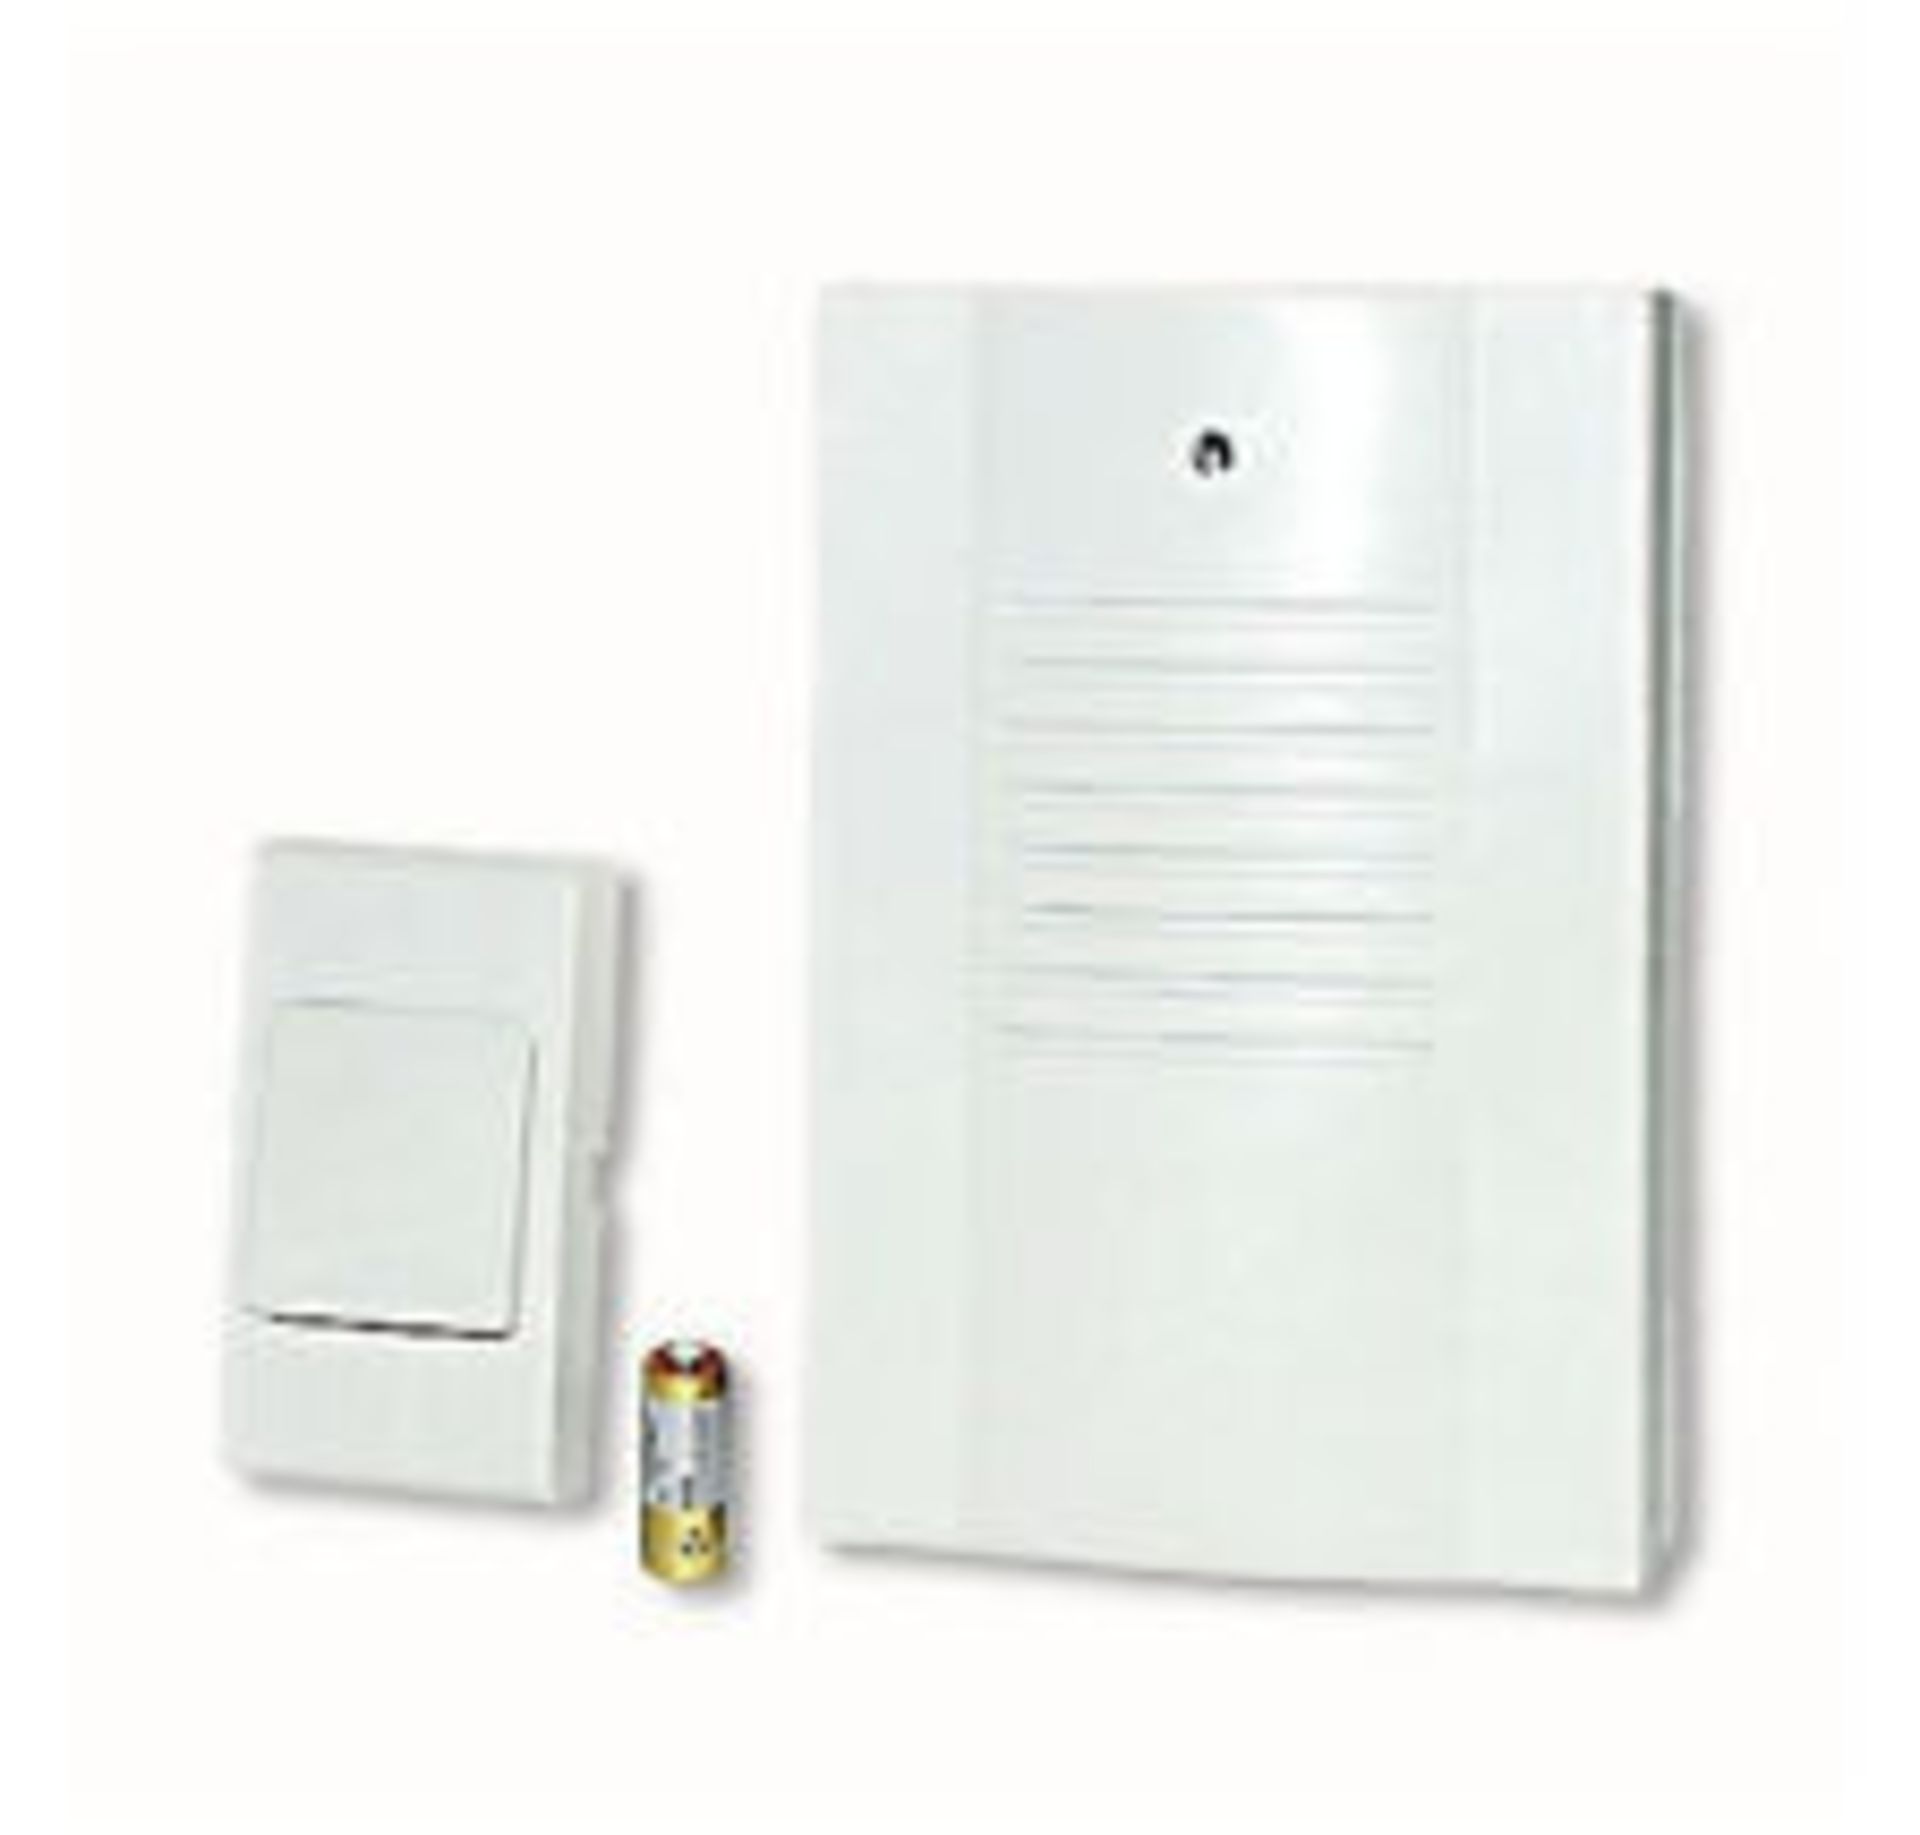 V Brand New Wireless Doorbell With 16 Different Melodies And Up To 30 Metre Range